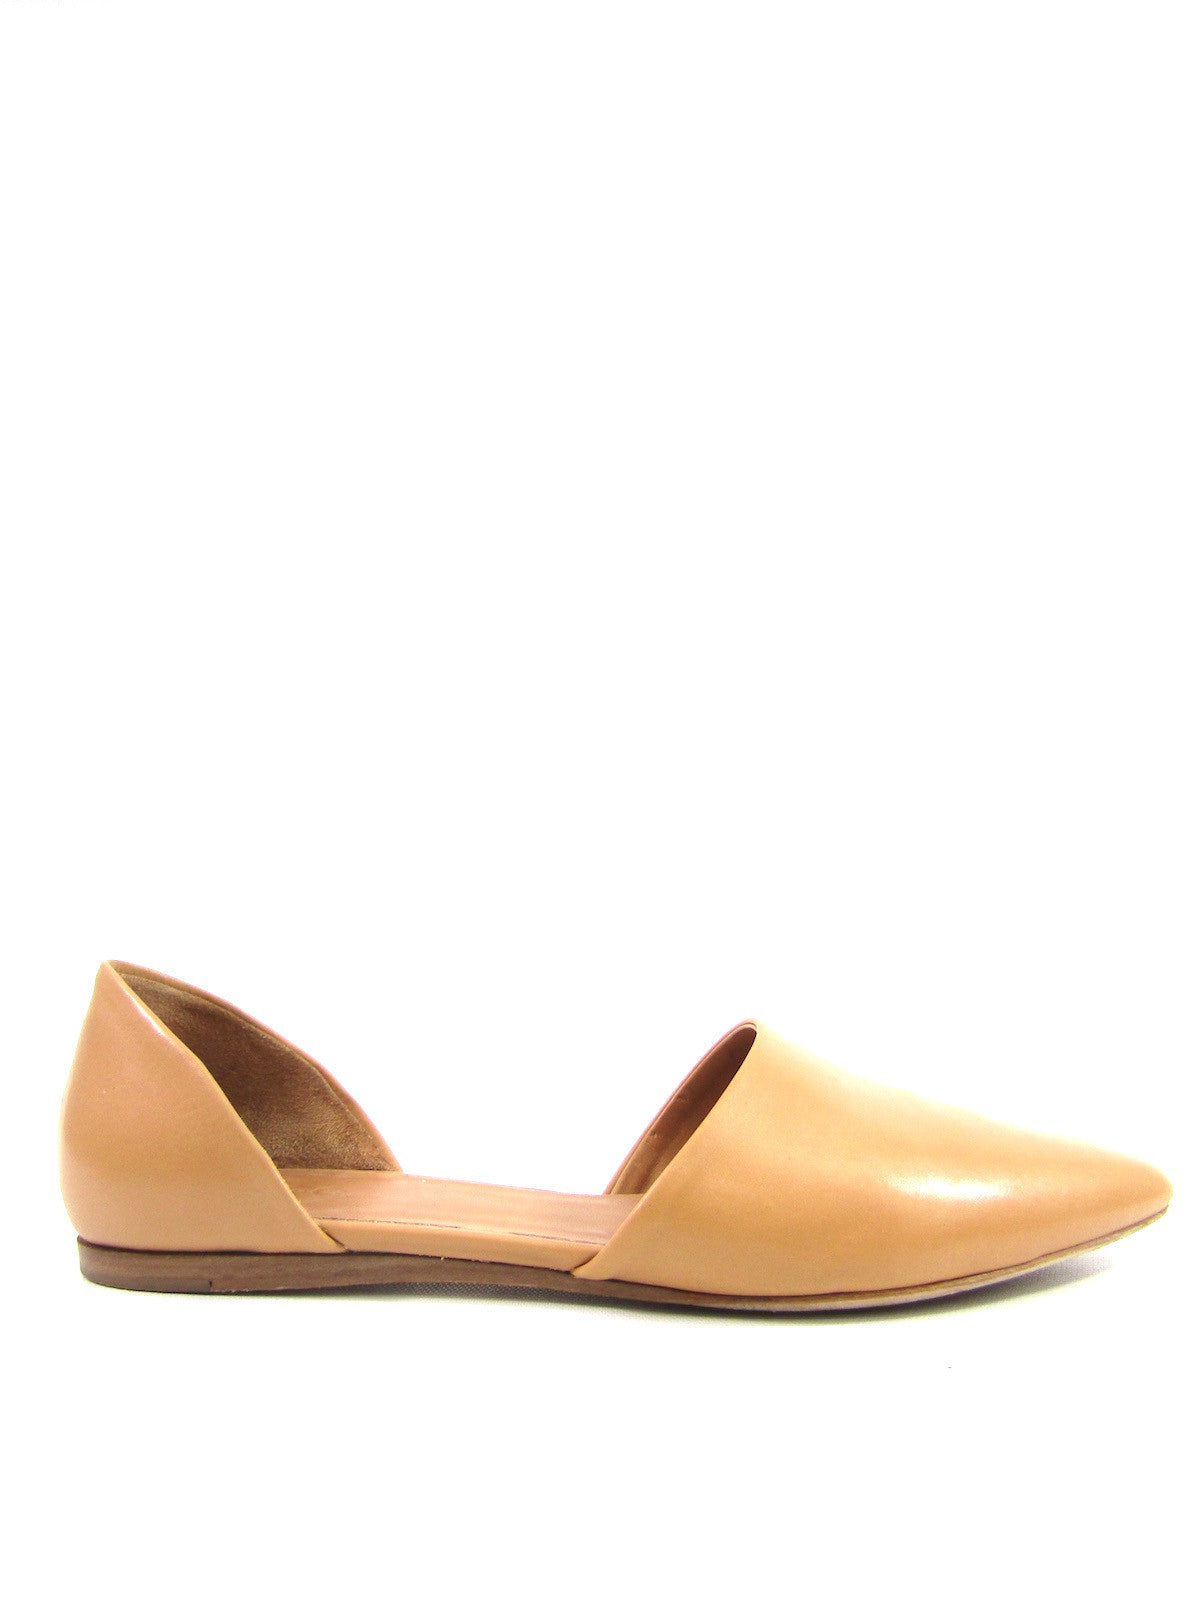 vince pointed toe flats